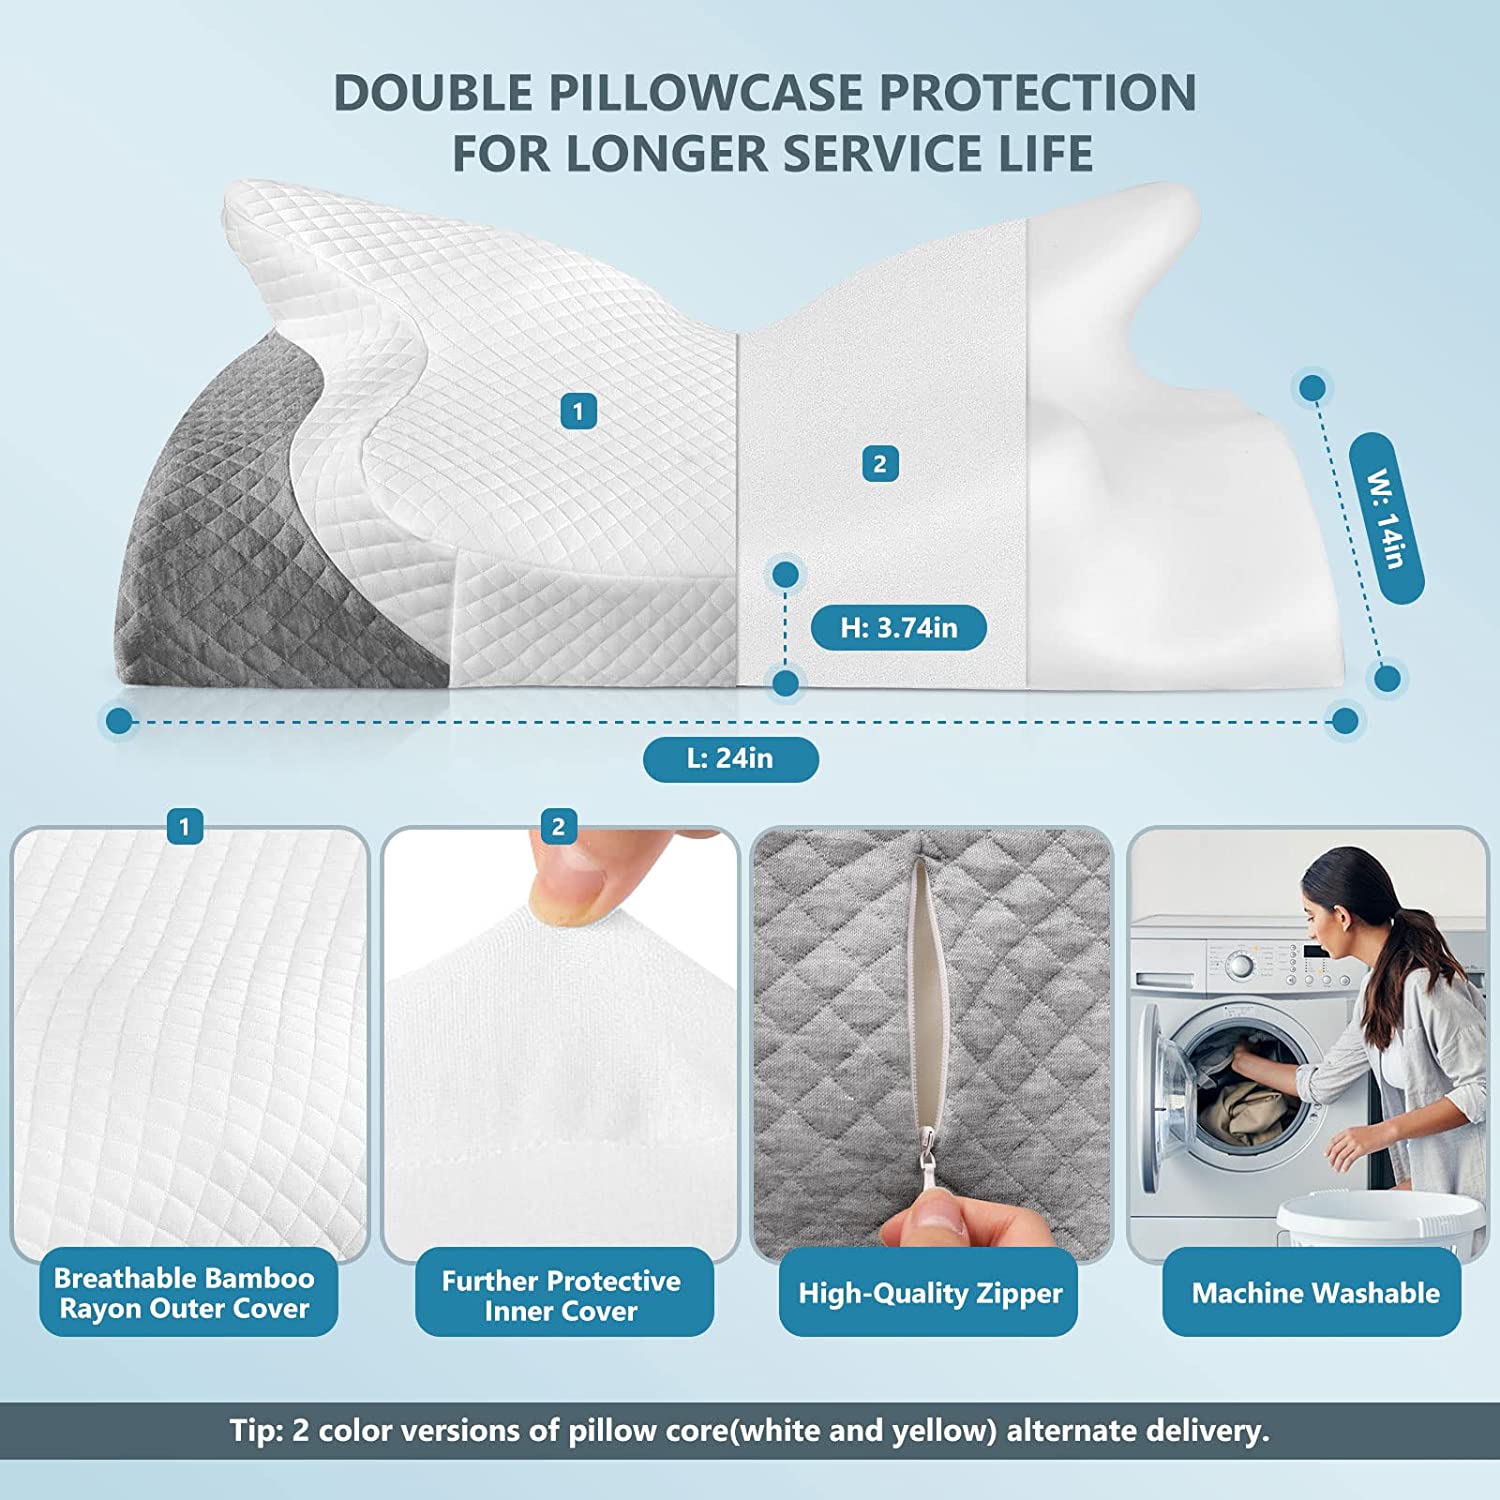 Adjustable Cervical Memory Foam Pillow, Odorless Neck Pillows for Pain Relief, Orthopedic Contour Pillows for Sleeping with Cooling Pillowcase, Bed Support Pillow for Side, Back, Stomach Sleeper